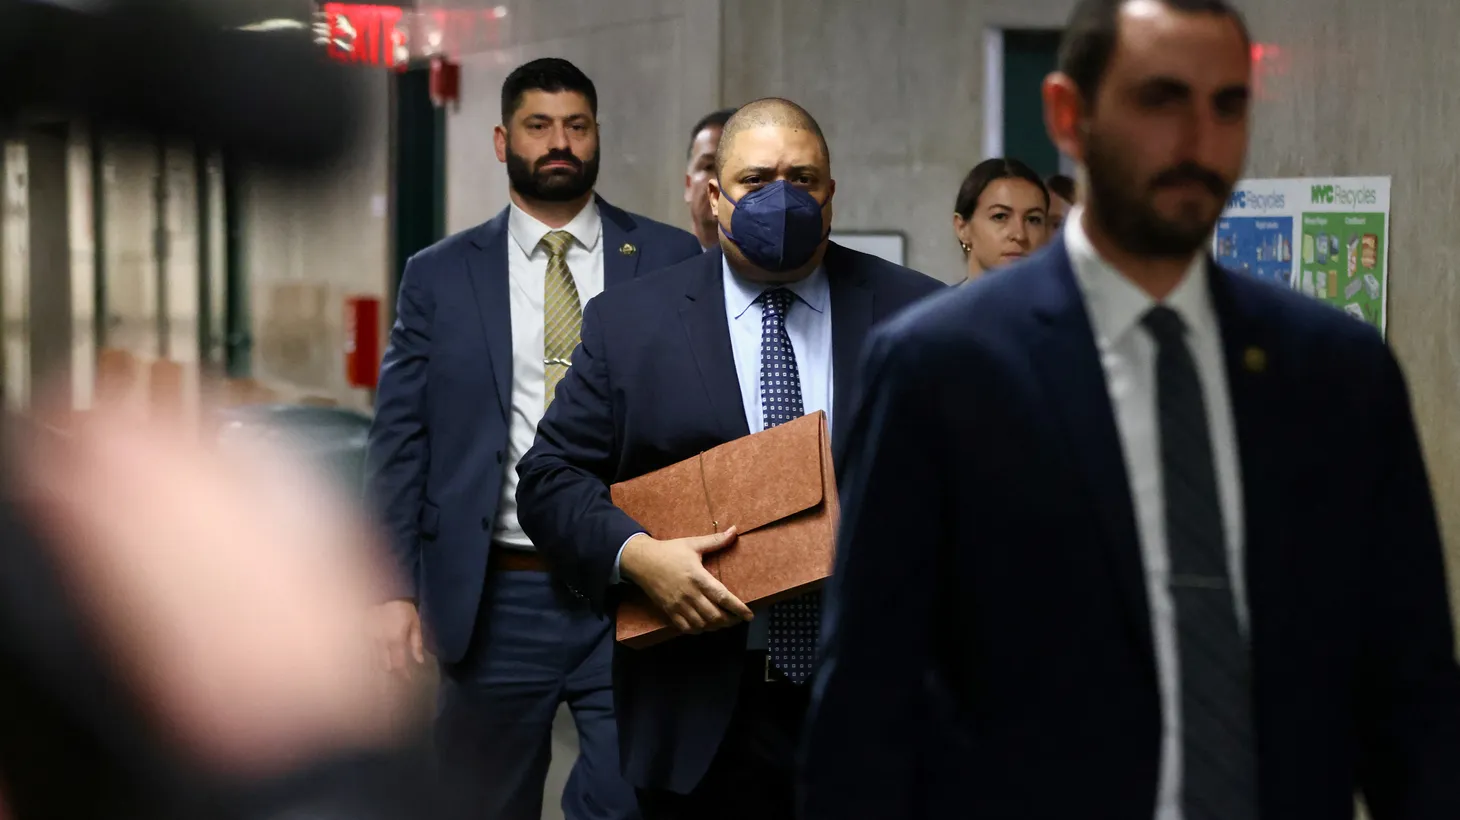 Manhattan District Attorney Alvin Bragg (center, masked) arrives for the sentencing hearing of the Trump Organization at the Manhattan Criminal Courthouse in New York City, U.S. January 13, 2023.